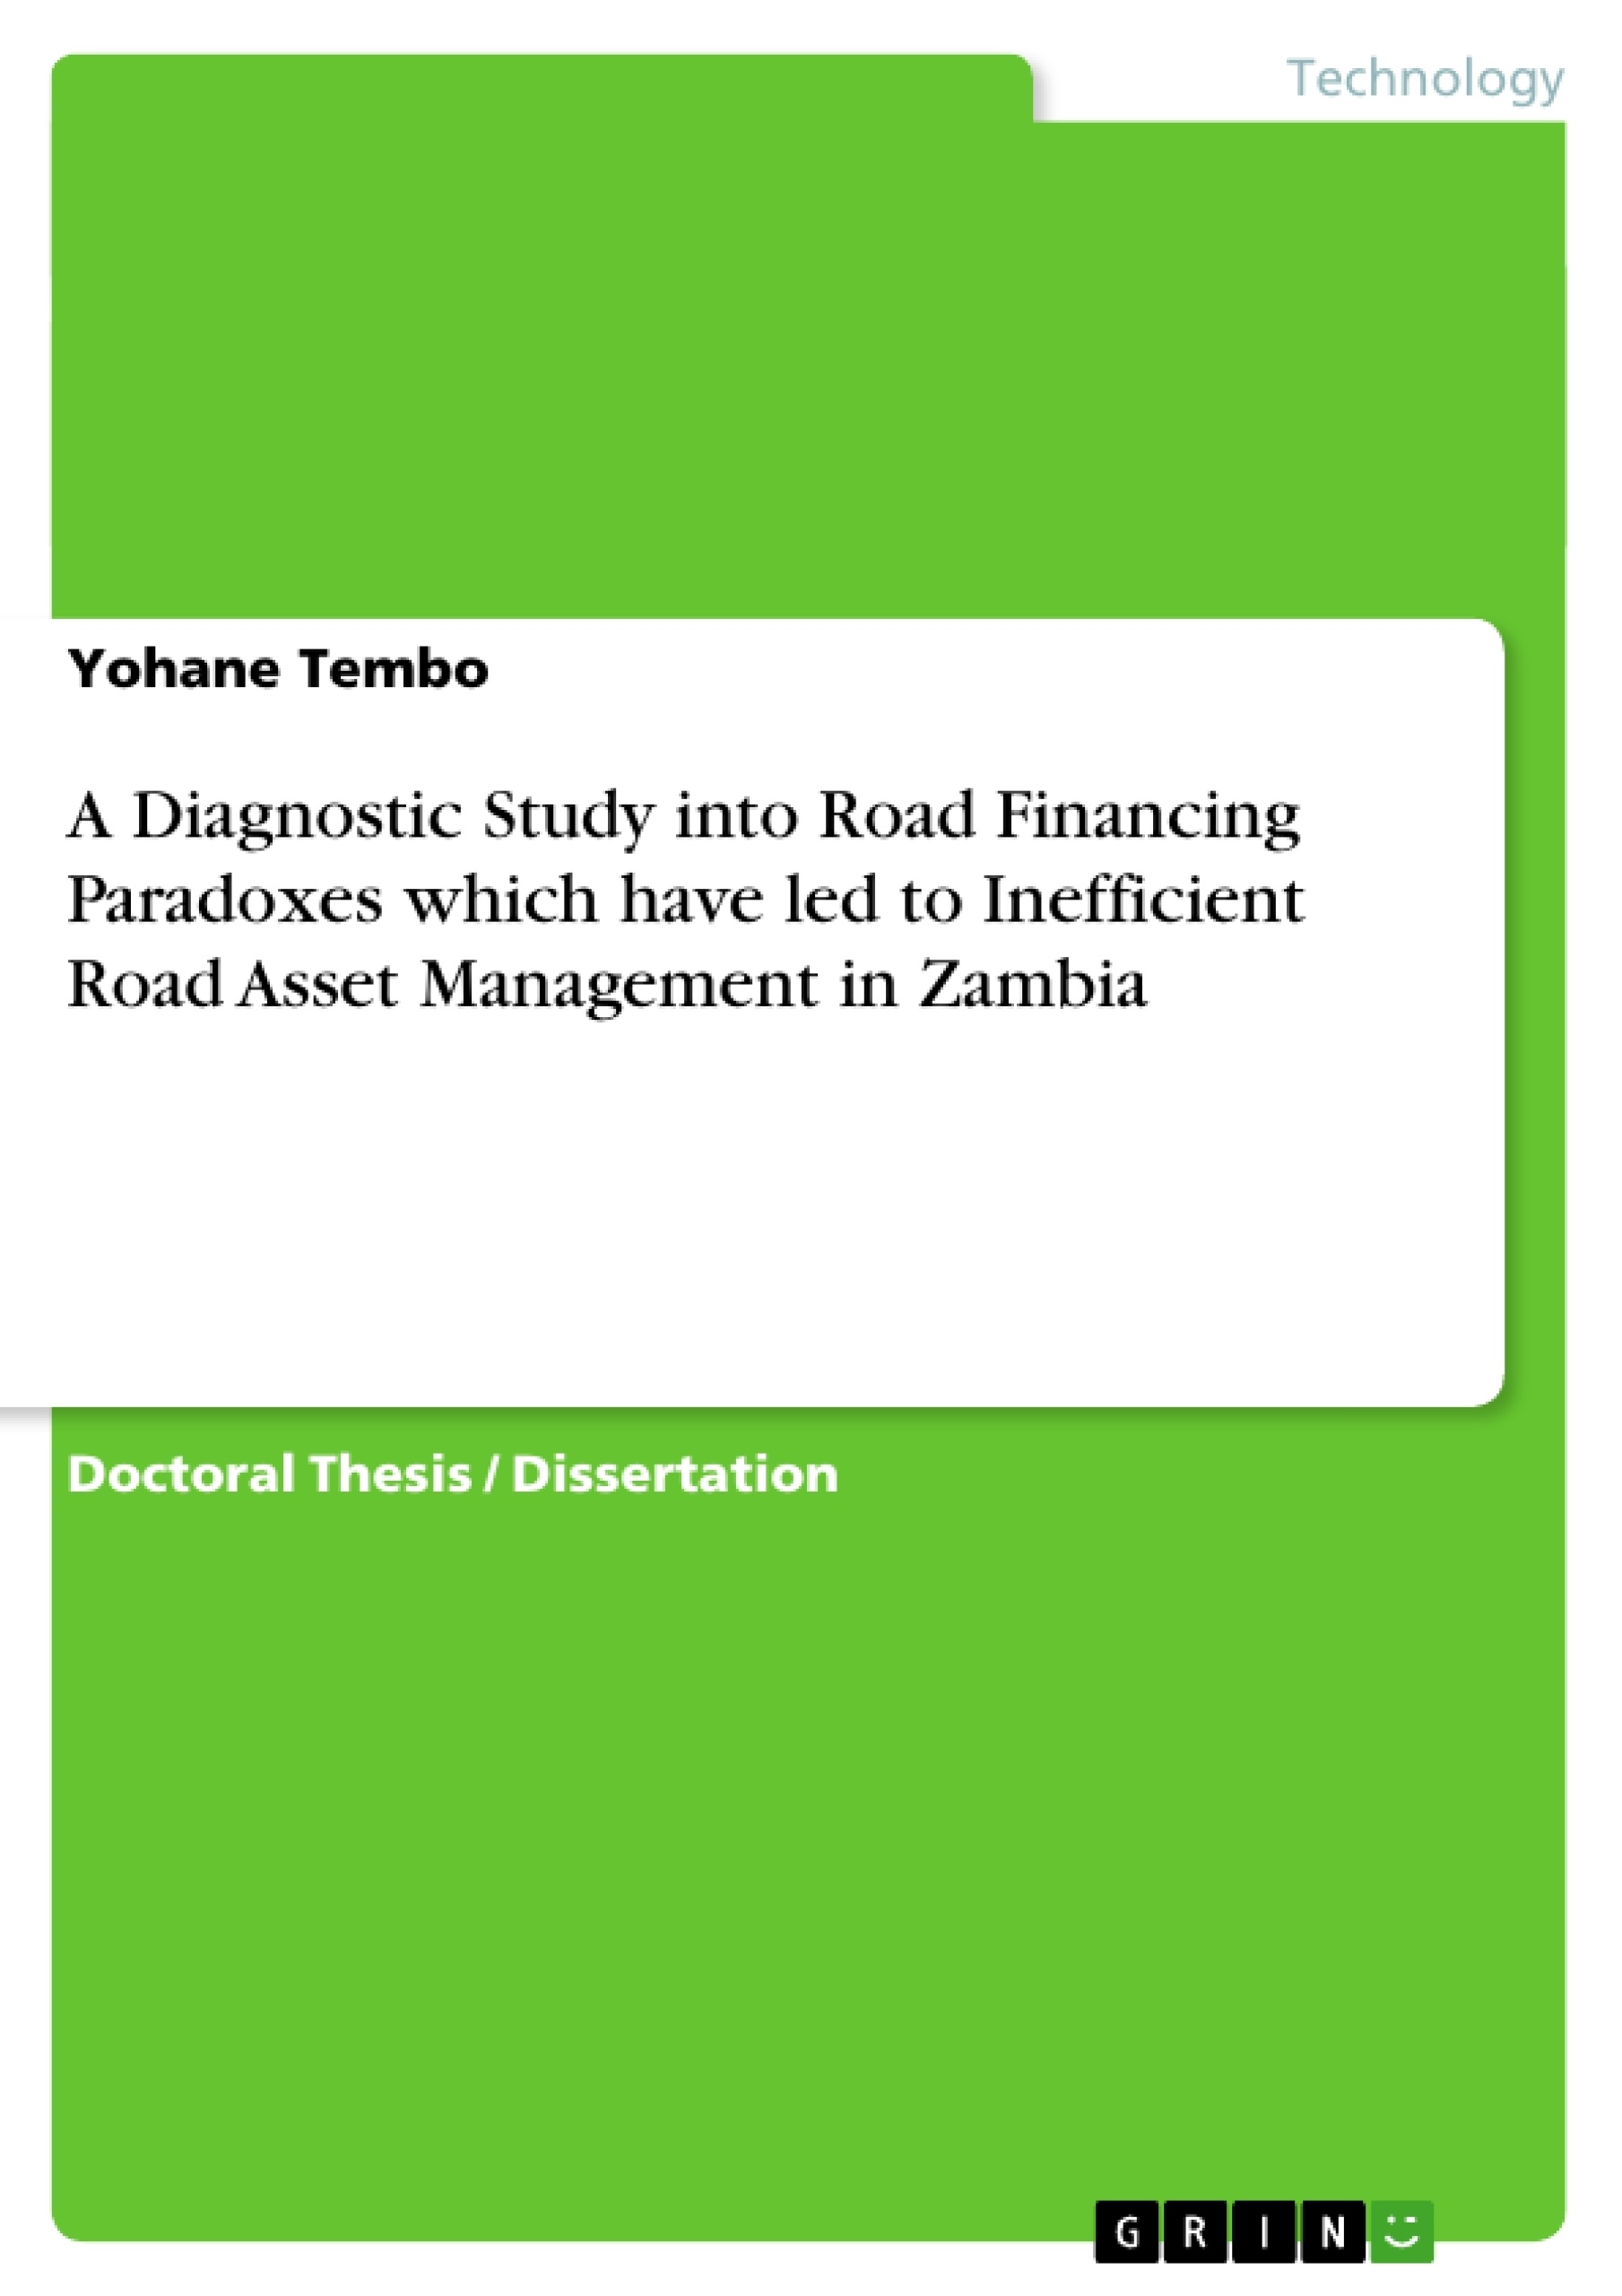 Title: A Diagnostic Study into Road Financing Paradoxes which have led to Inefficient Road Asset Management in Zambia